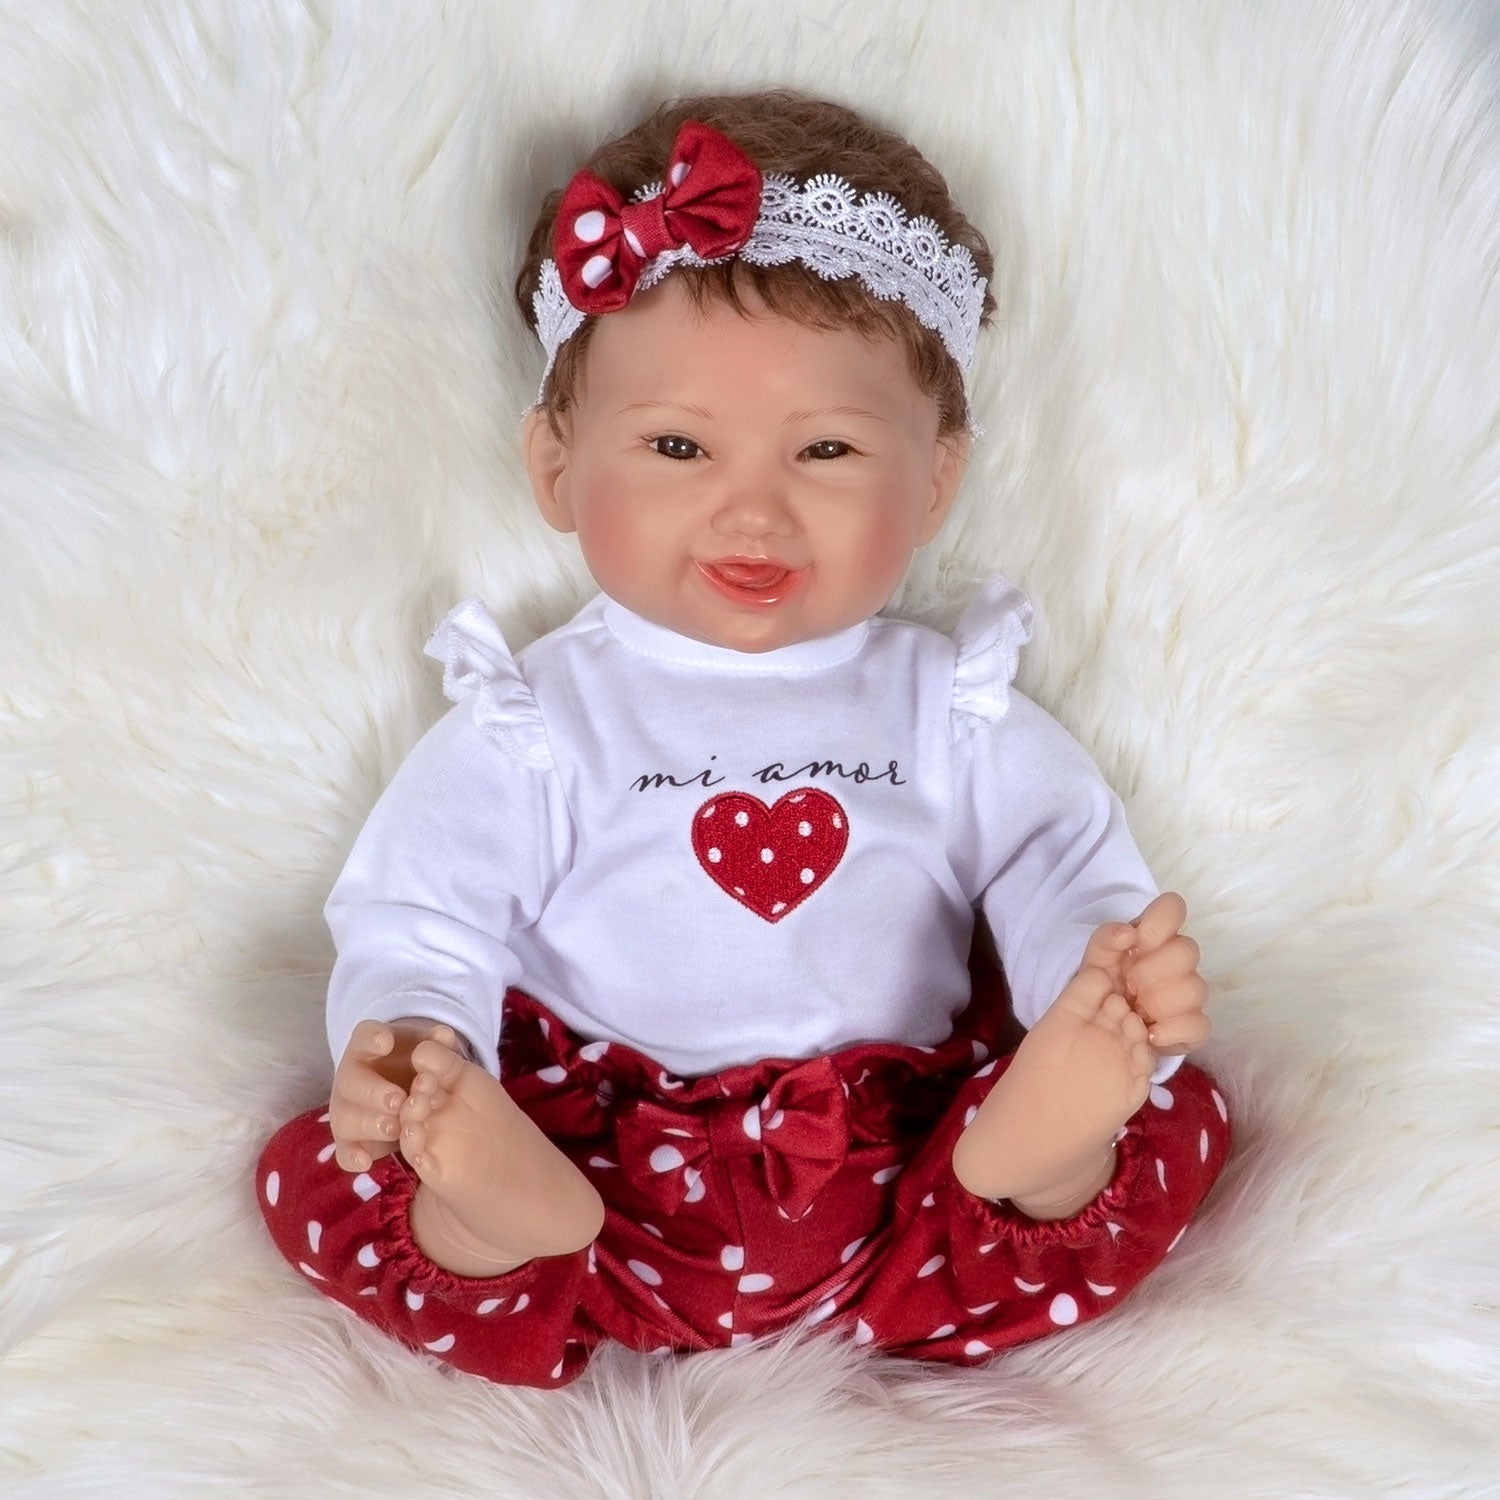 Paradise Galleries Mi Amor - Realistic Toddler Doll with heartbeat mechanism that really beats when you hug her!, 19 Inch Reborn Doll in GentleTouch Vinyl by Reborn Artist, Mayra Garza